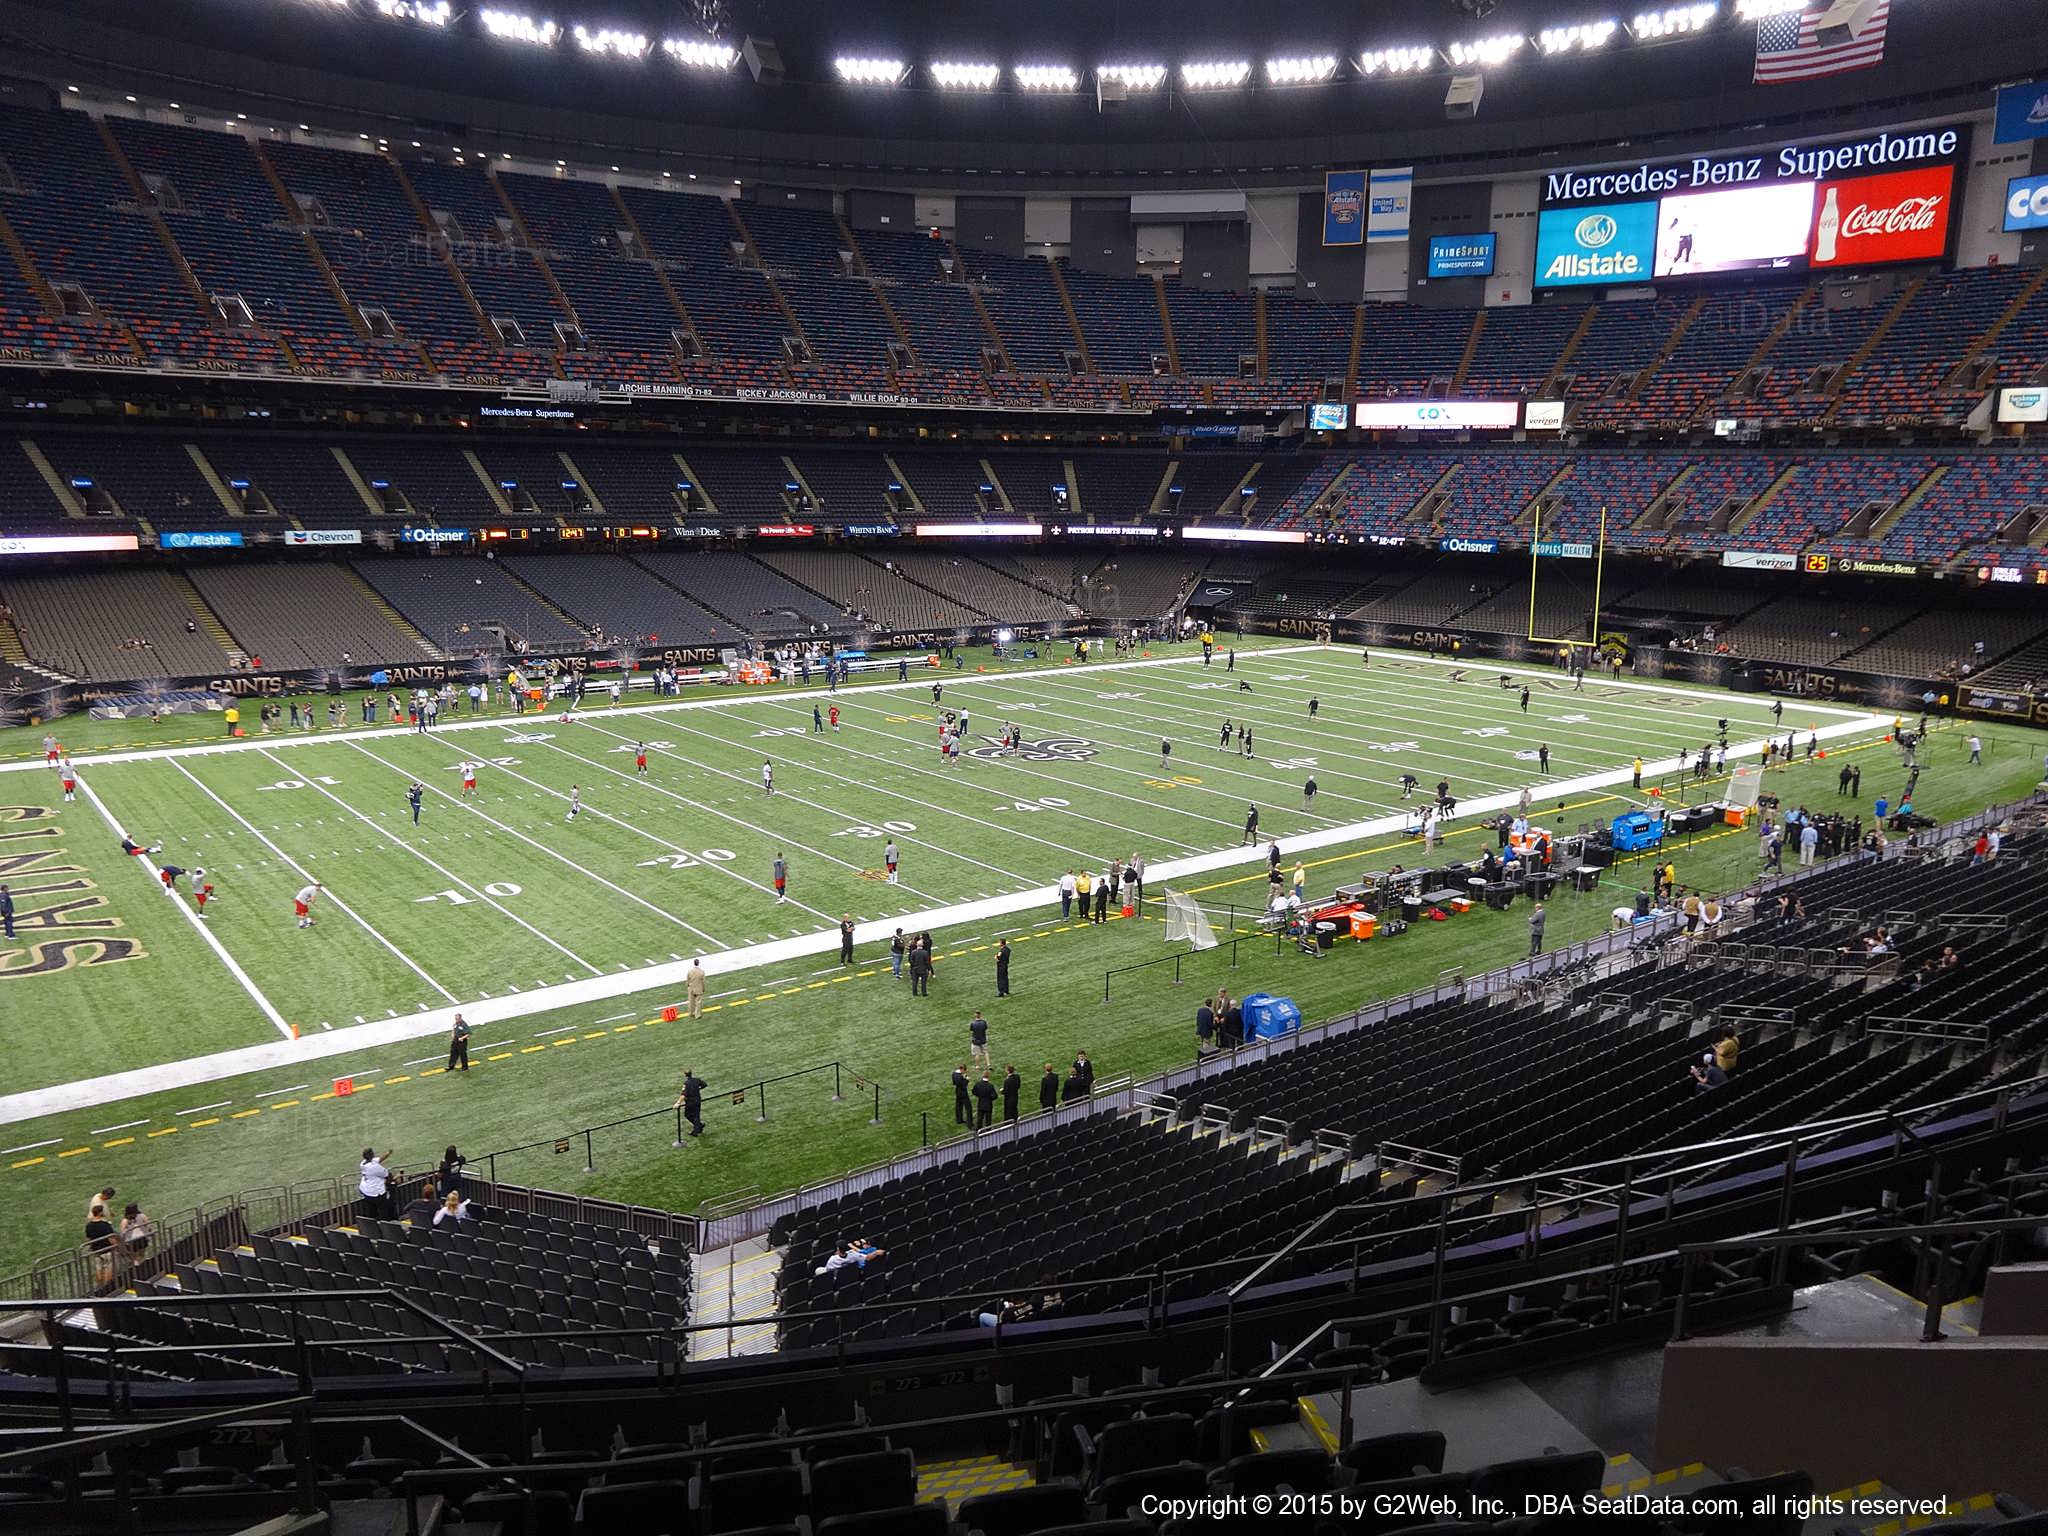 Seat view from section 341 at the Mercedes-Benz Superdome, home of the New Orleans Saints